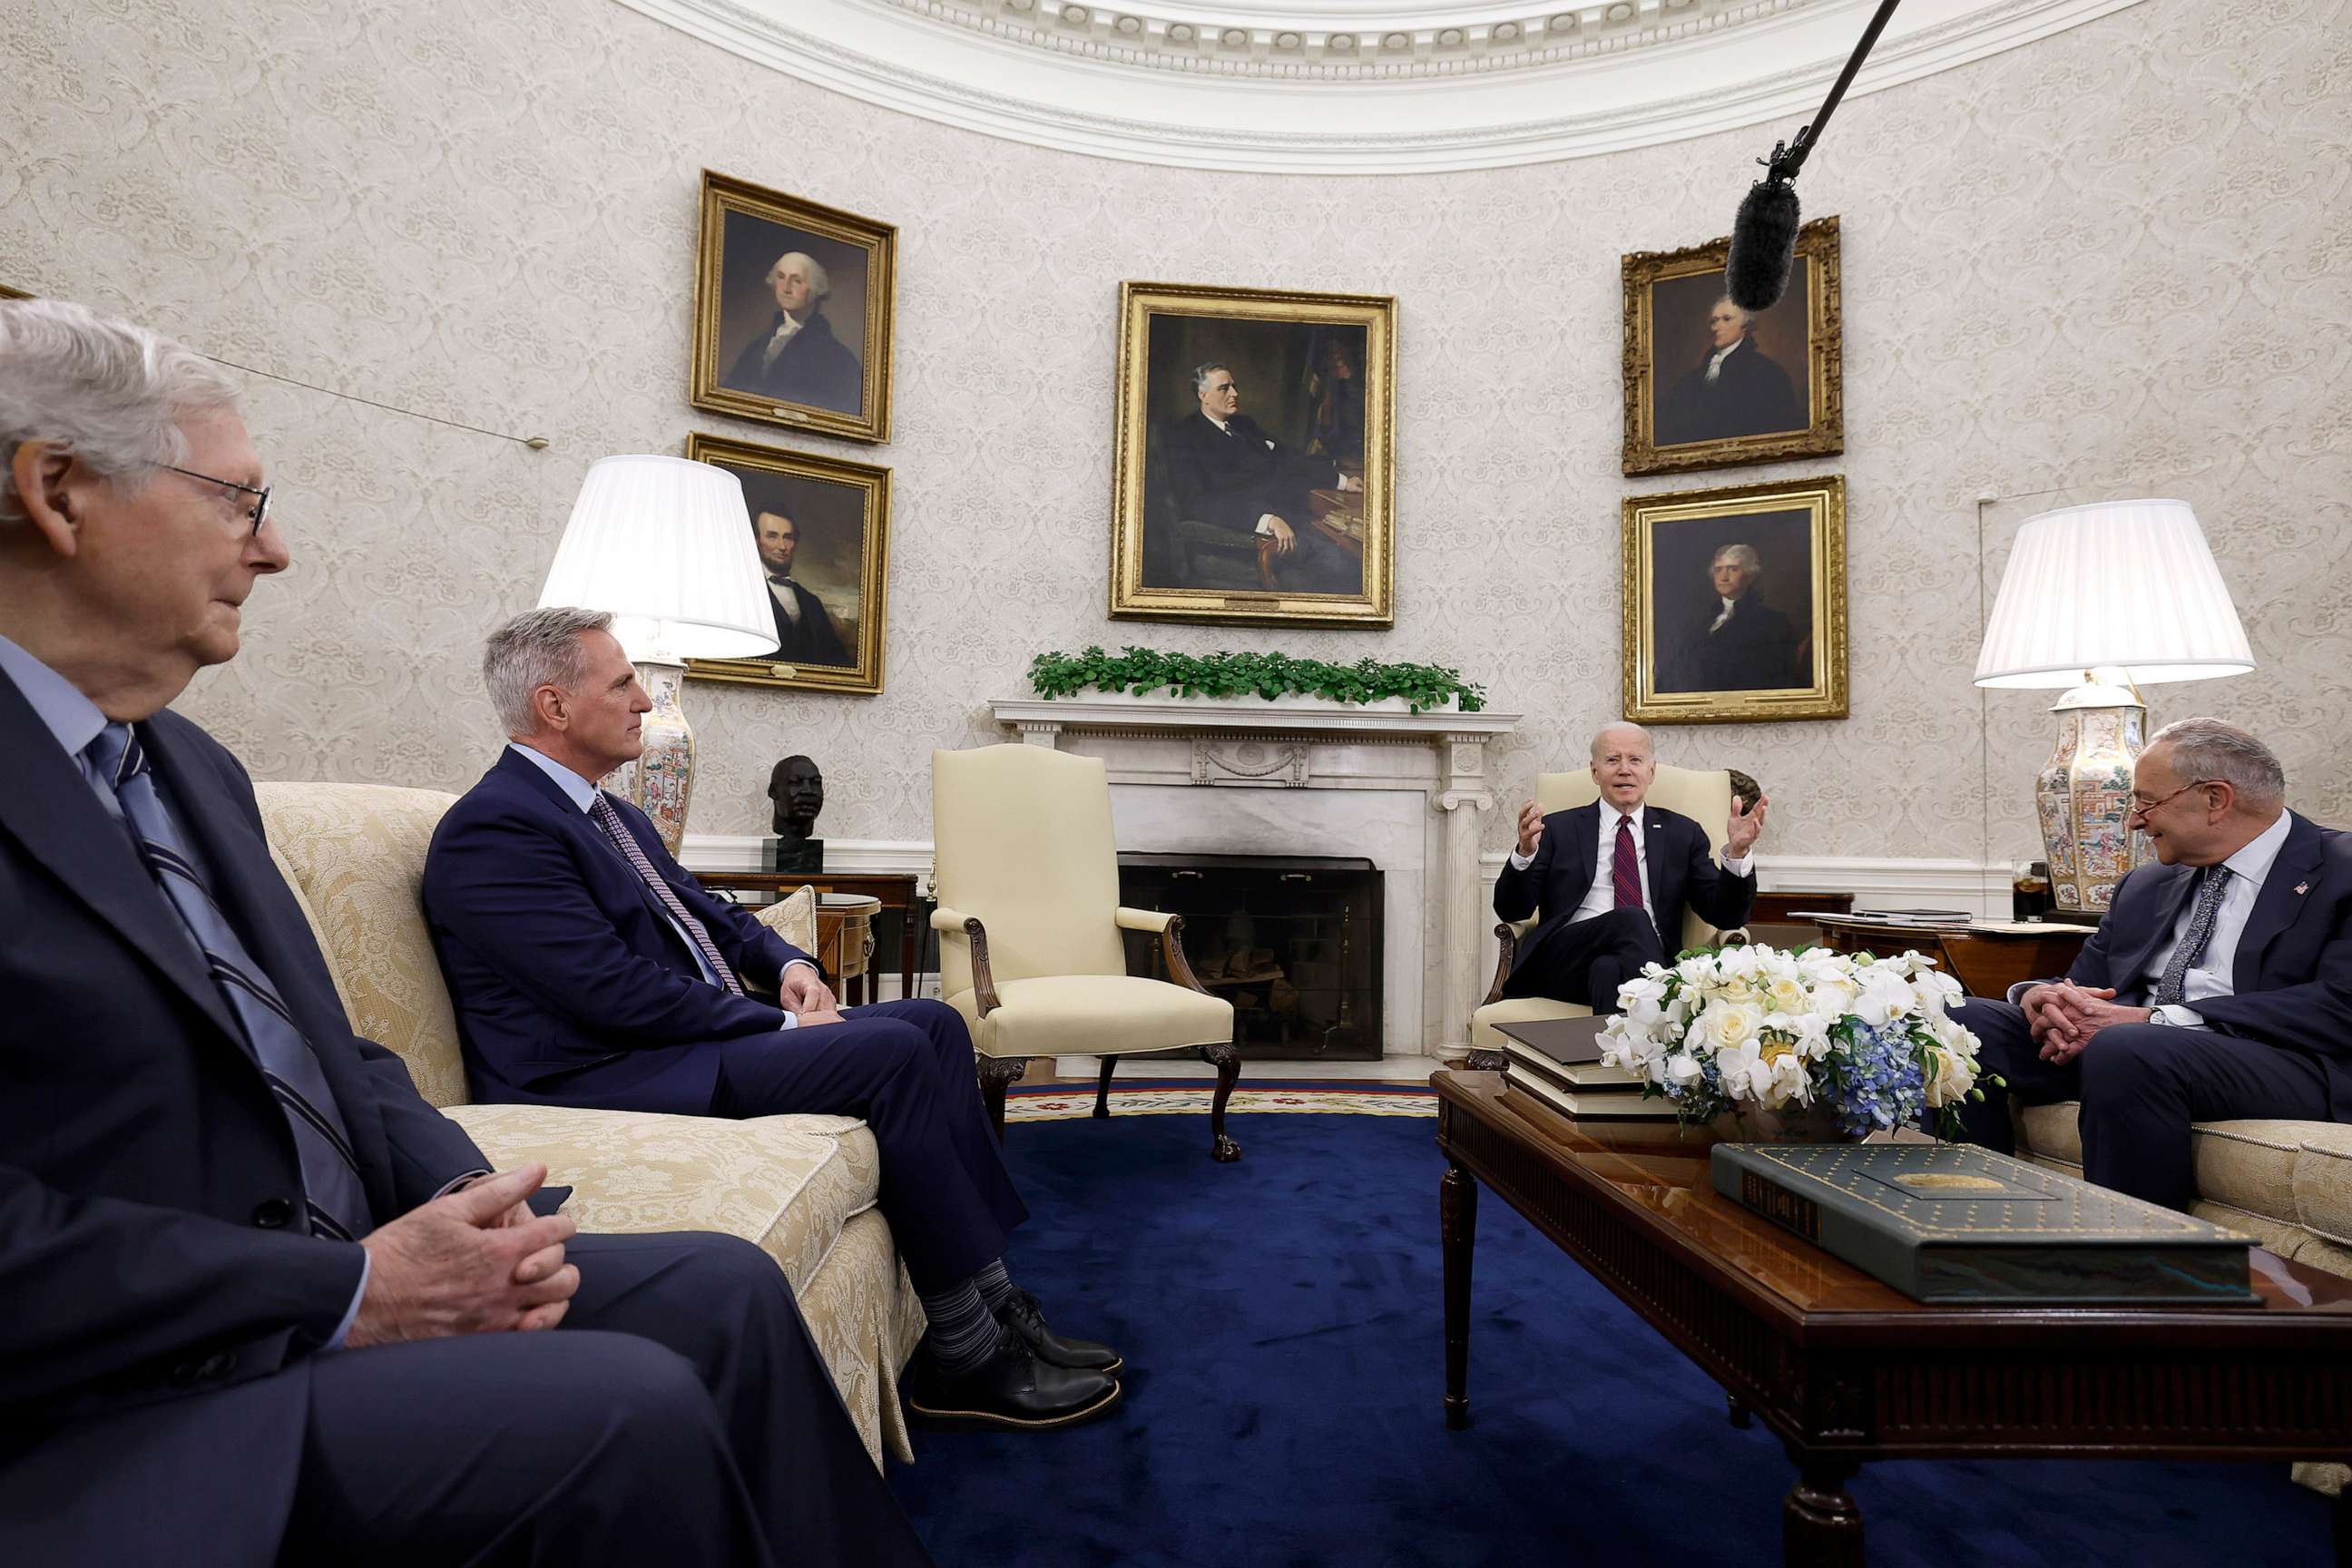 PHOTO: U.S. Senate Minority Leader Mitch McConnell (R-KY), Speaker of the House Kevin McCarthy (R-CA), President Joe Biden, and Senate Majority Leader Chuck Schumer (D-NY) meet in the Oval Office of the White House, May 9, 2023, in Washington.